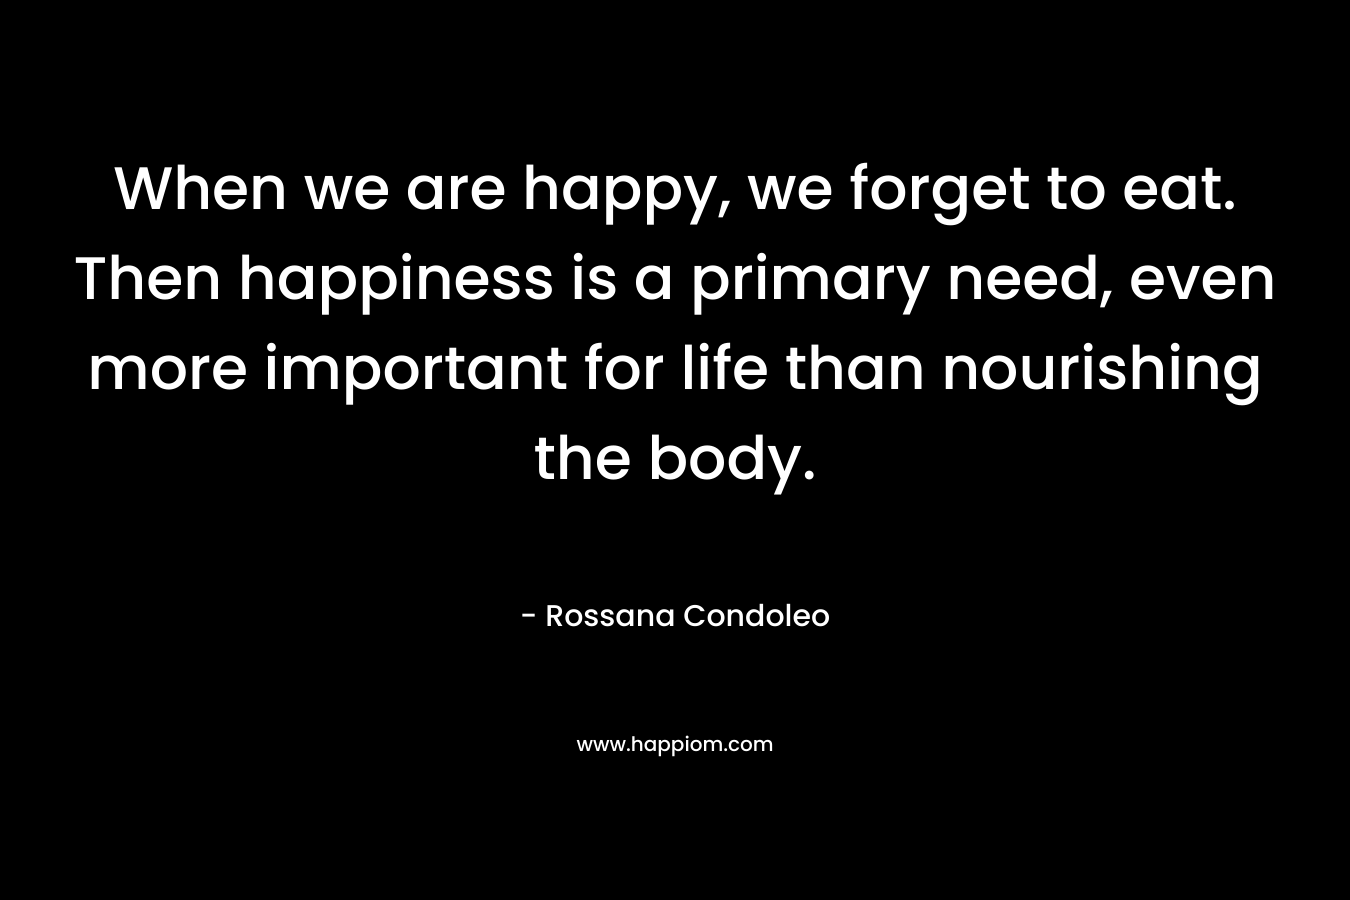 When we are happy, we forget to eat. Then happiness is a primary need, even more important for life than nourishing the body. – Rossana Condoleo